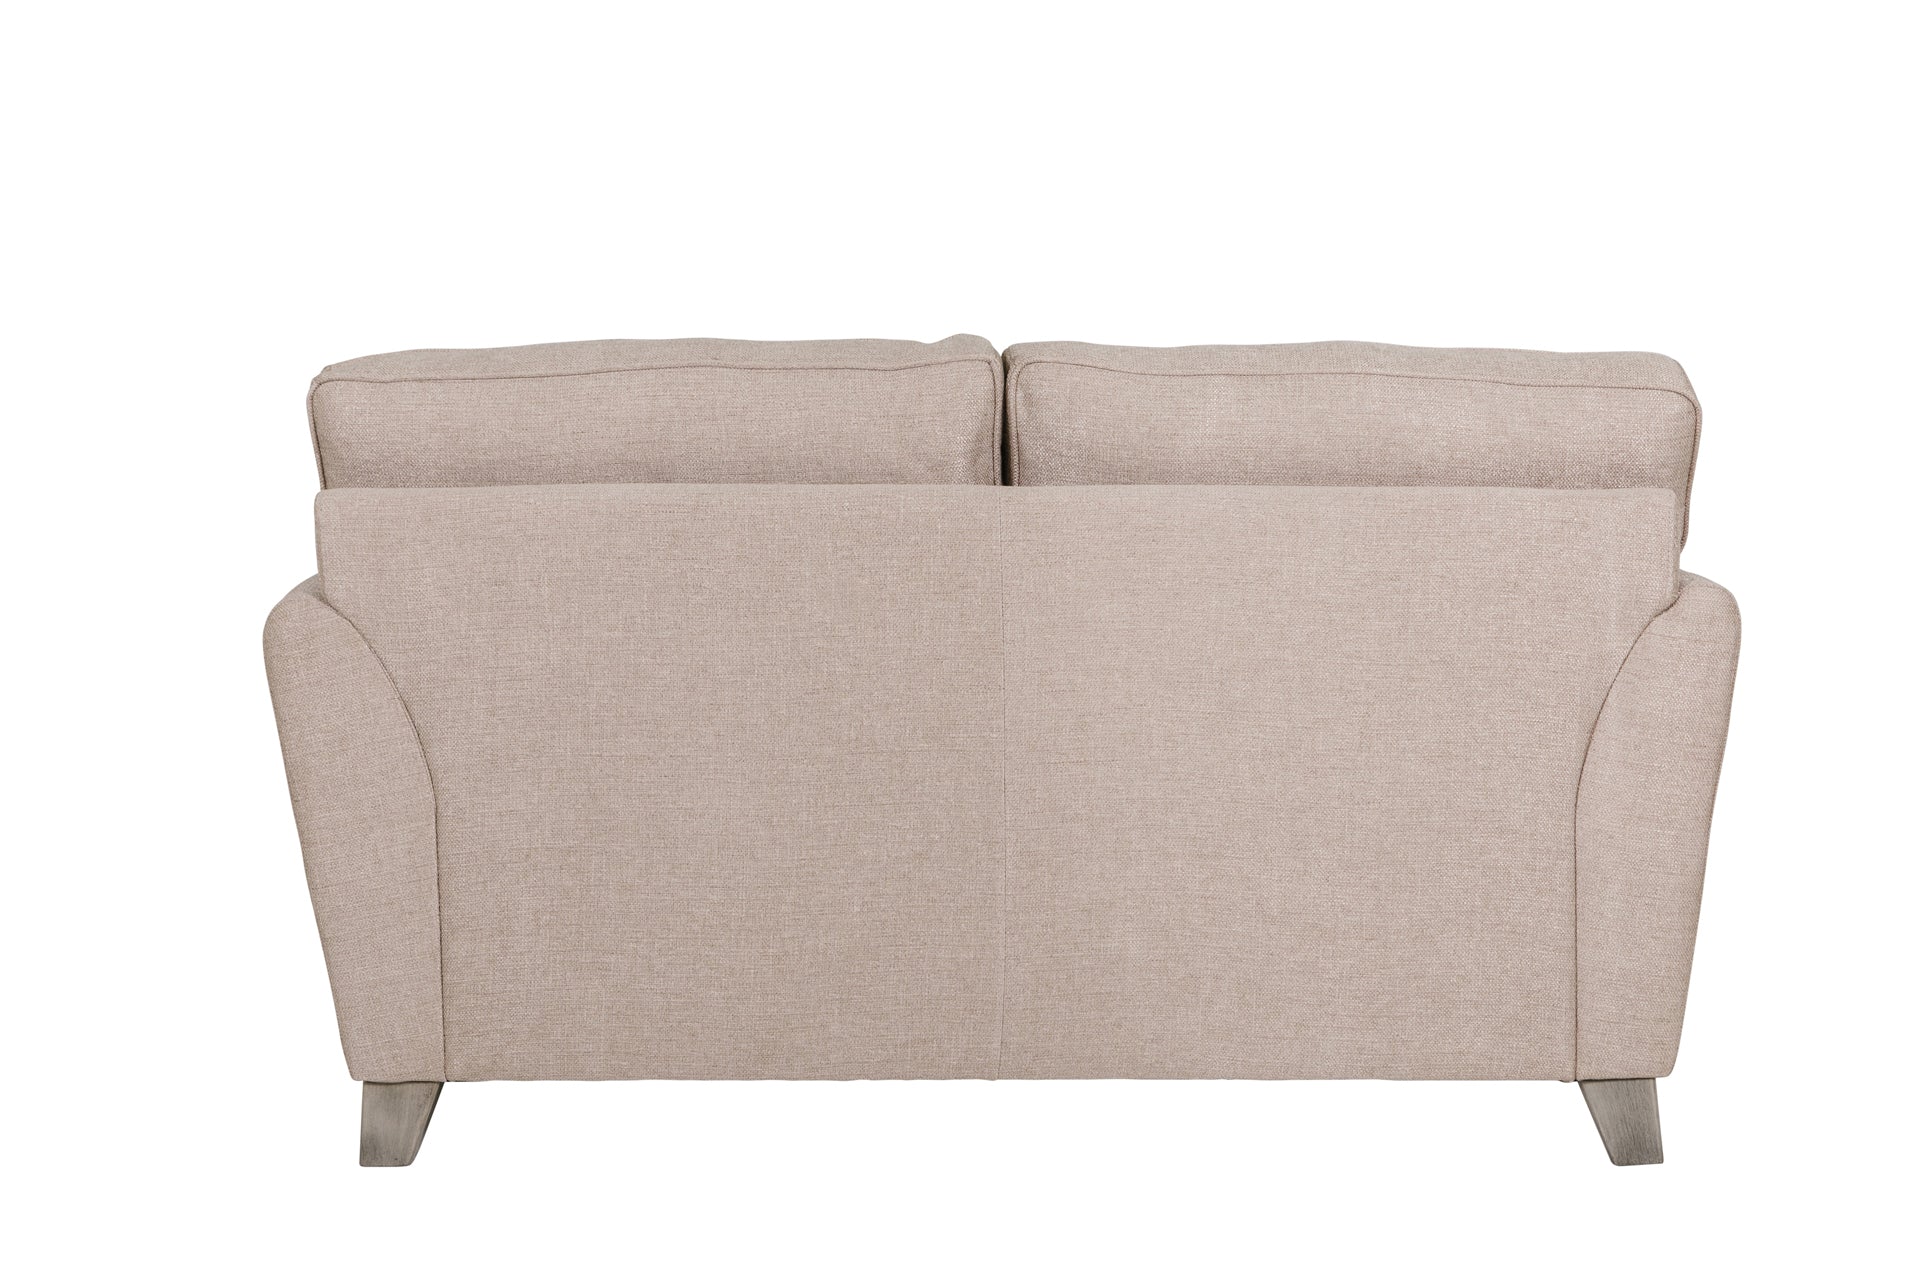 Cromwell Biscuit Linen Fabric Sofa